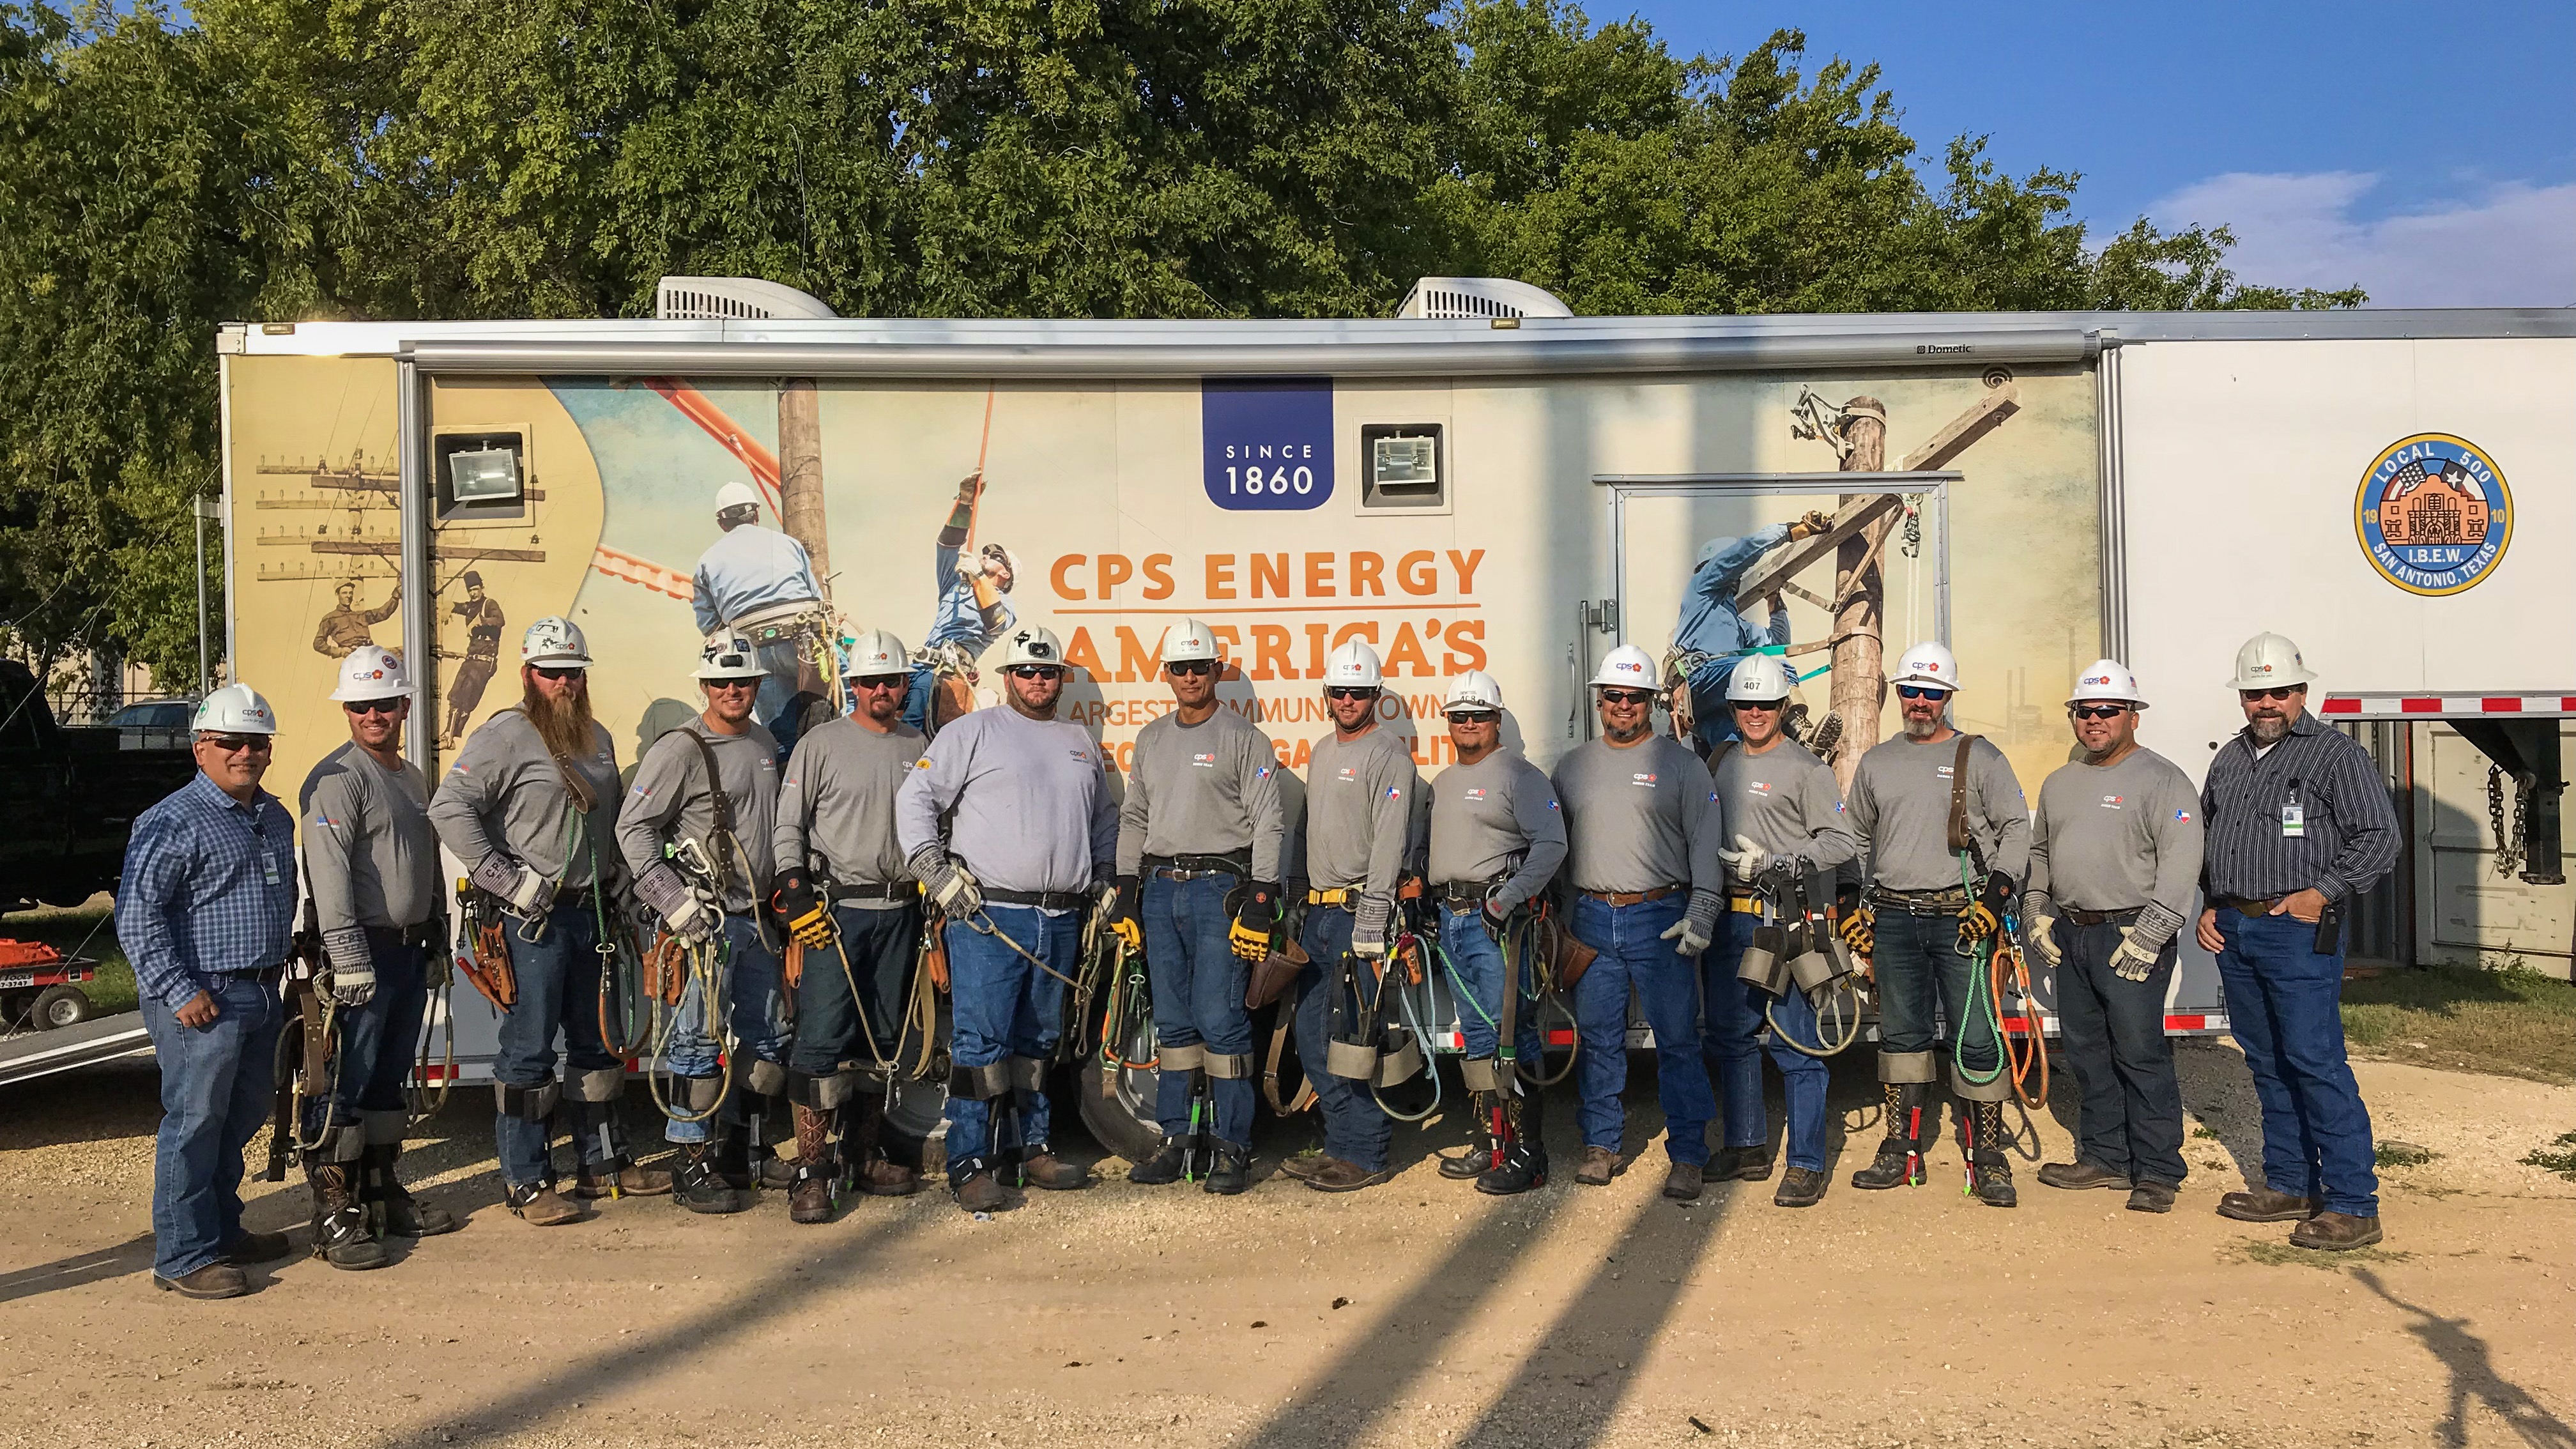 16 CPS Energy linemen to compete in 34th Annual International Lineman’s